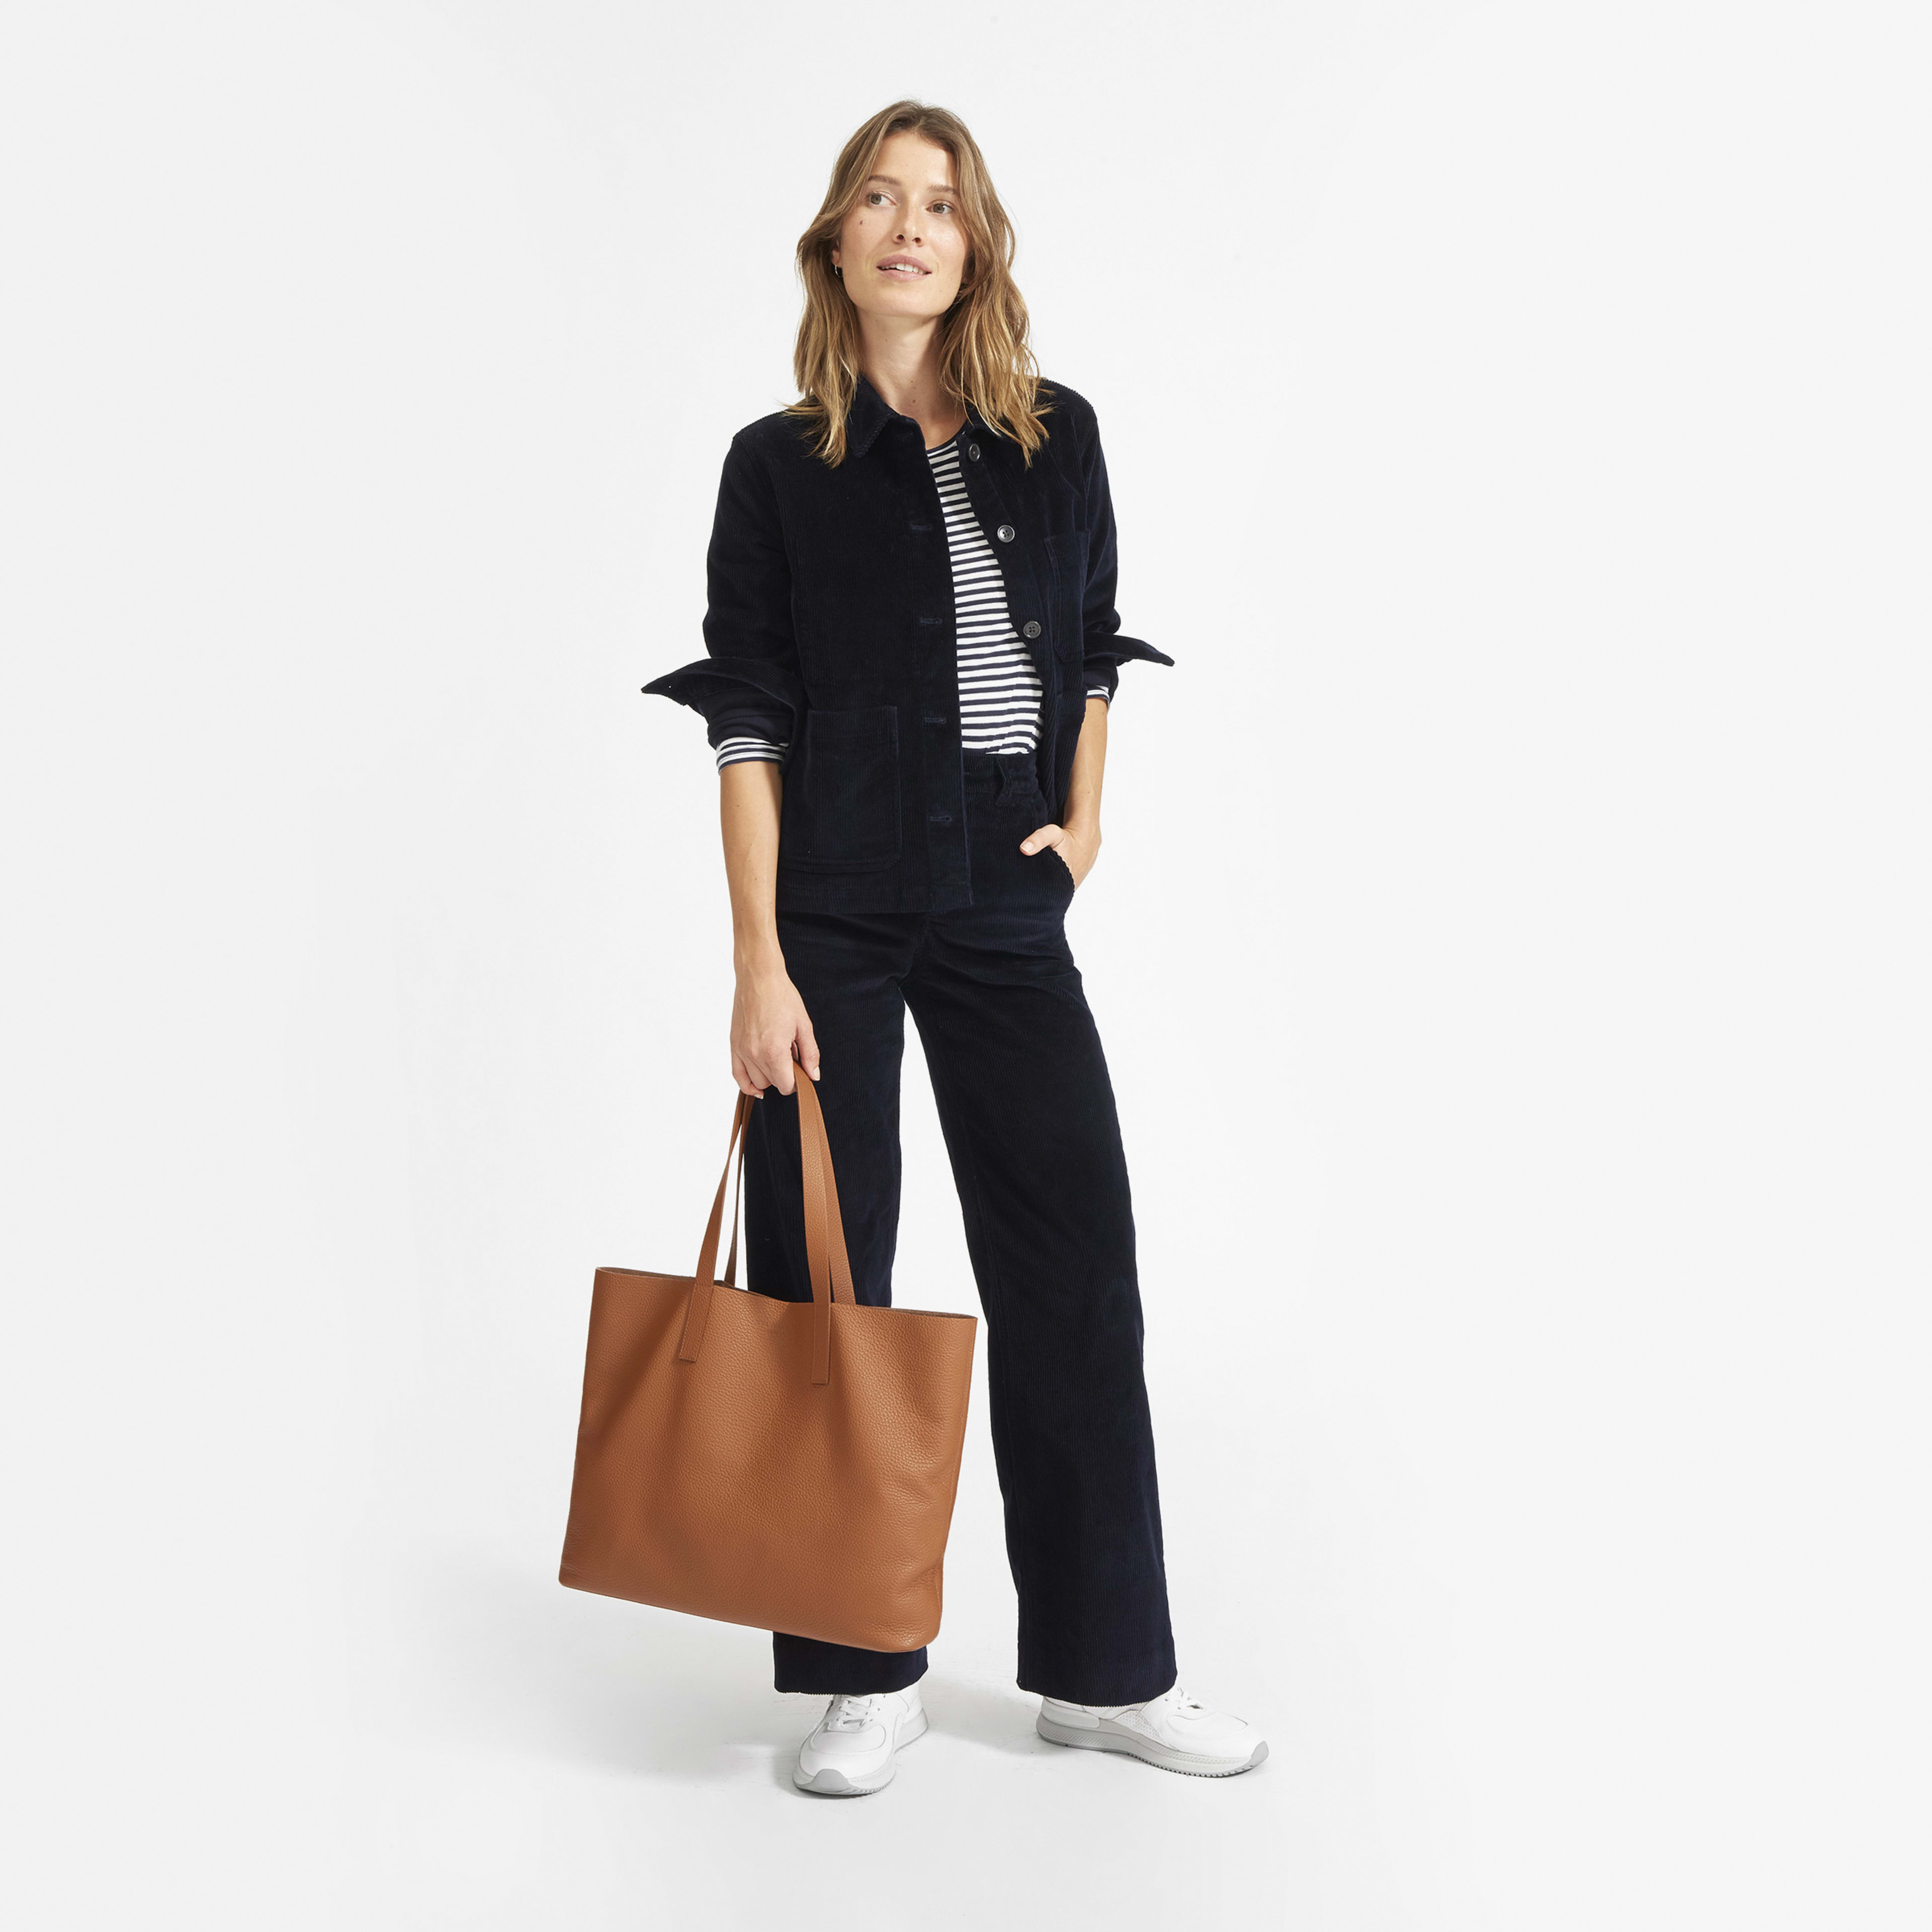 The Soft Day Tote Cognac – Everlane